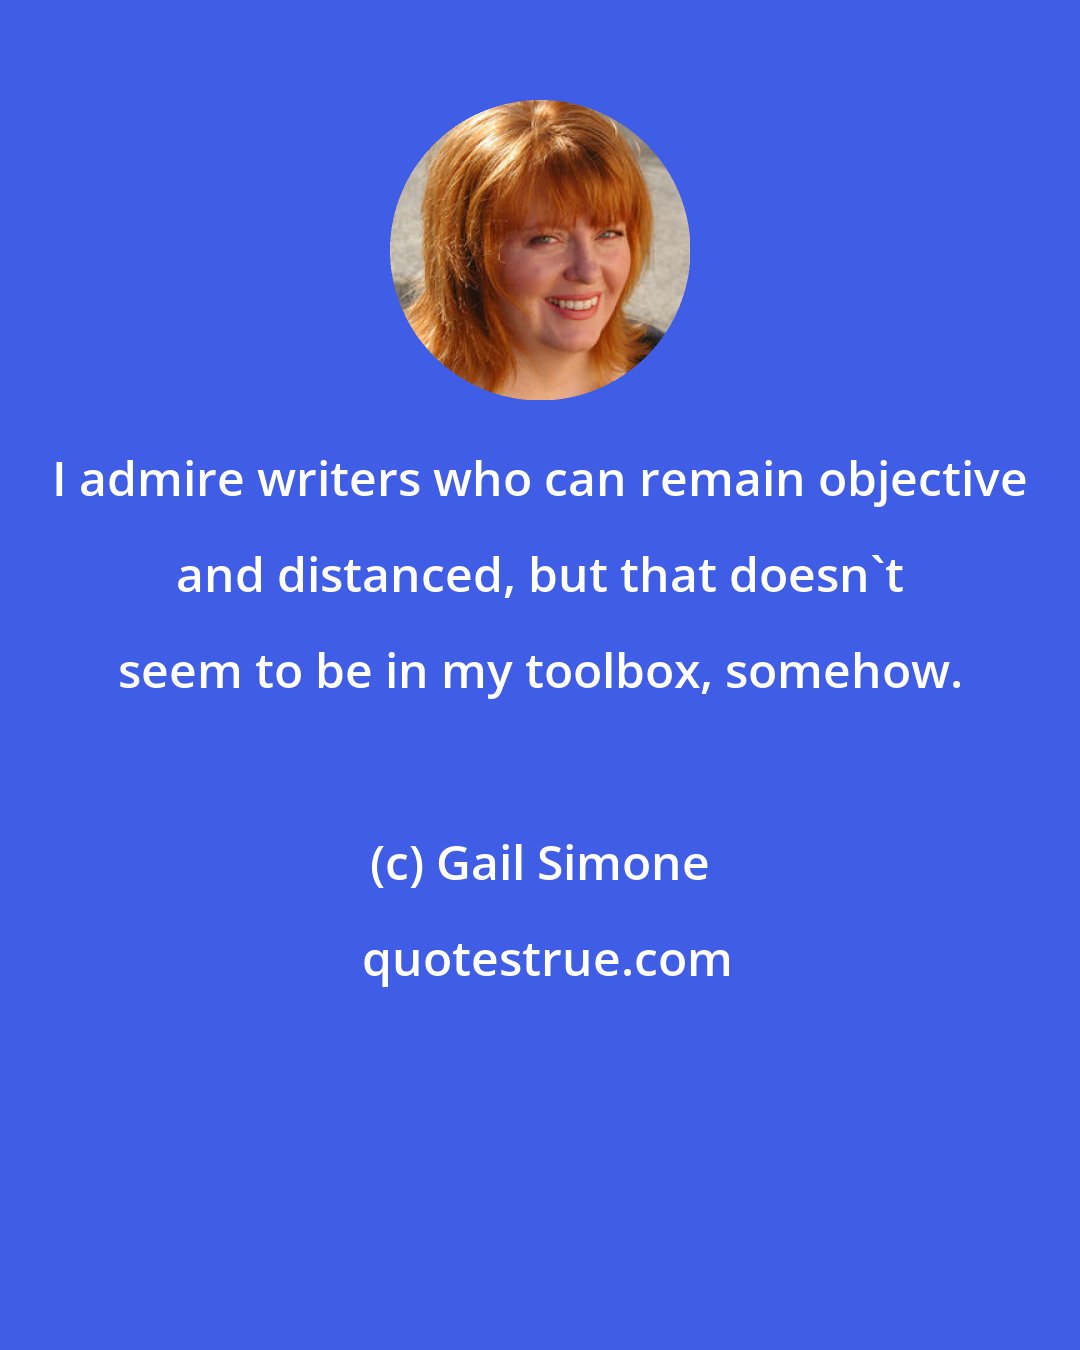 Gail Simone: I admire writers who can remain objective and distanced, but that doesn't seem to be in my toolbox, somehow.